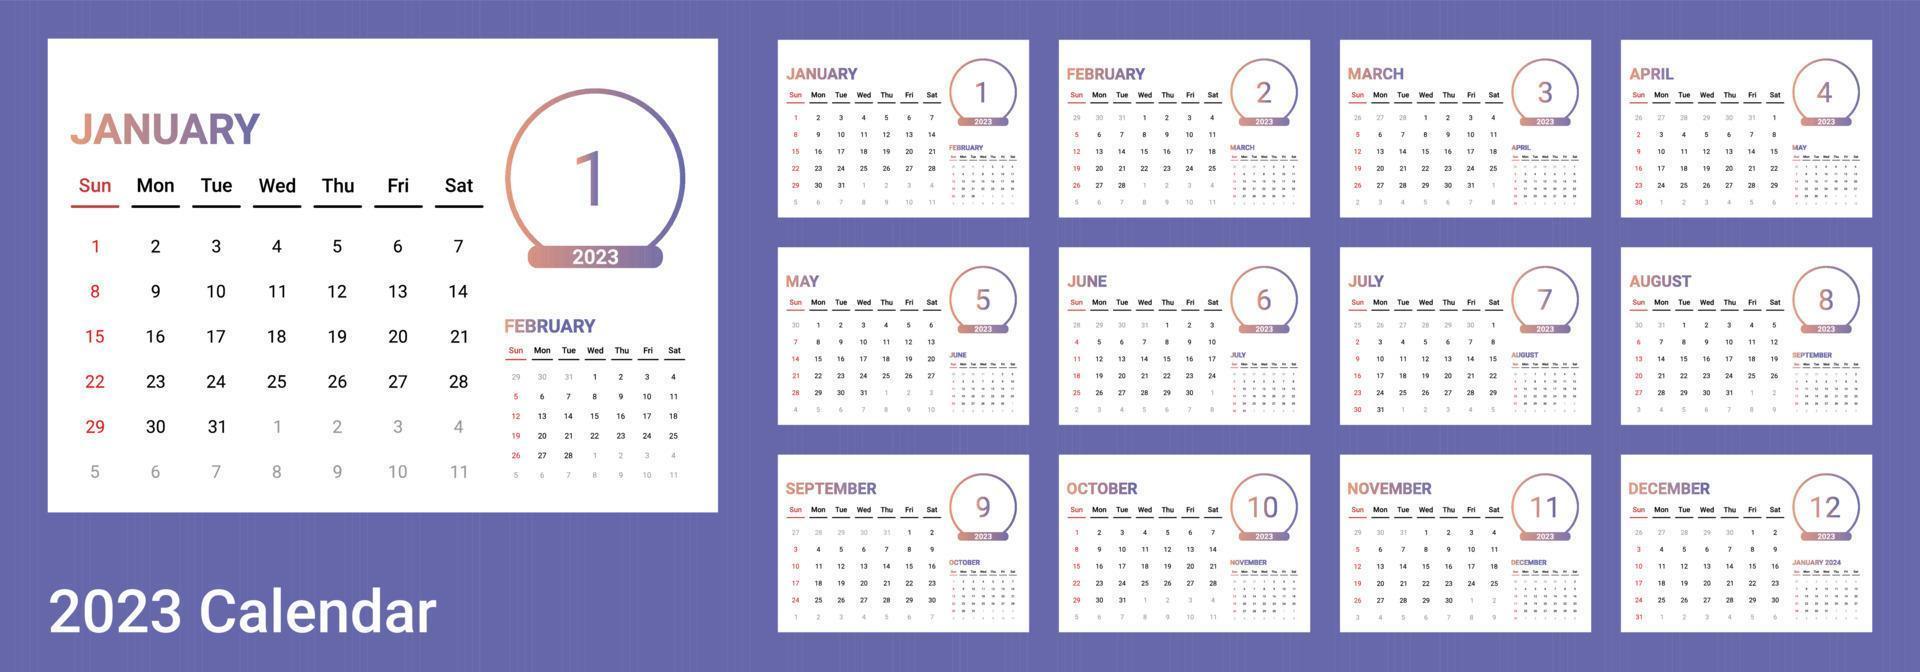 vector of 2023 calendar. monthly 2023 calendar template. wall calender with gradient themes. sunday as weekend. week start on sunday. good for schedule, daily log, planner, etc.